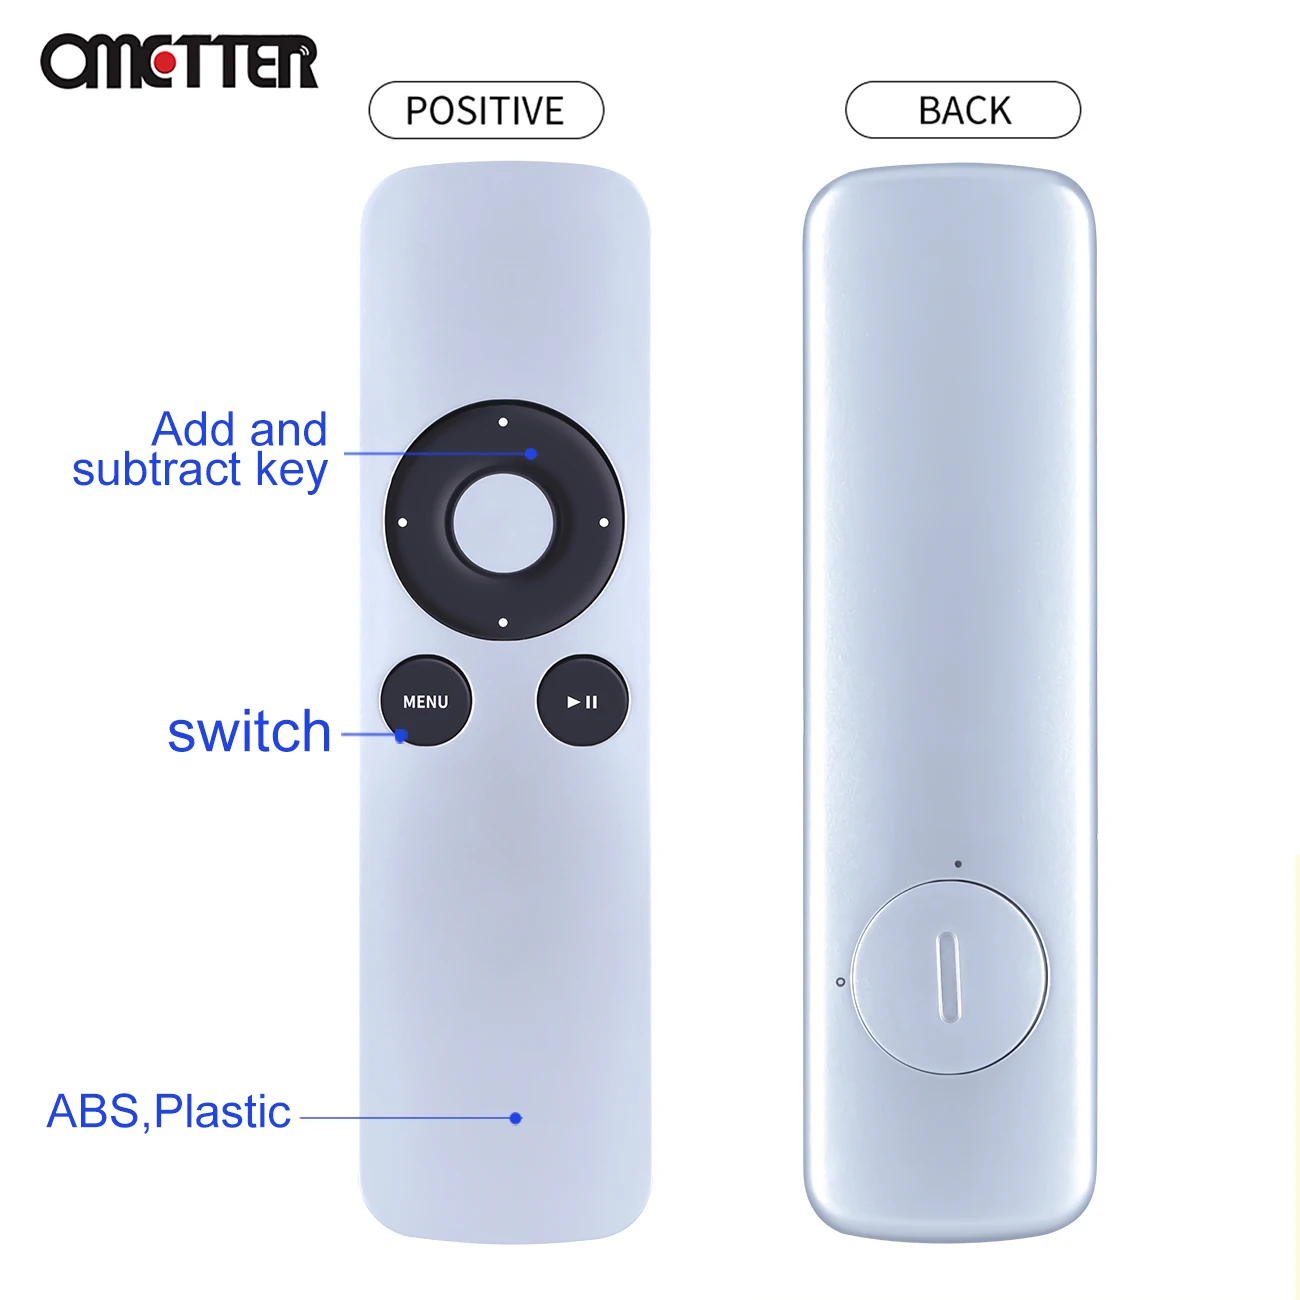 For en dagstur sekstant Baby For Apple A1294 A1469 Remote Control Universal Apple TV1 TV2 TV3 A1427  A1738 Macbook Pro ipod iphone _ - AliExpress Mobile